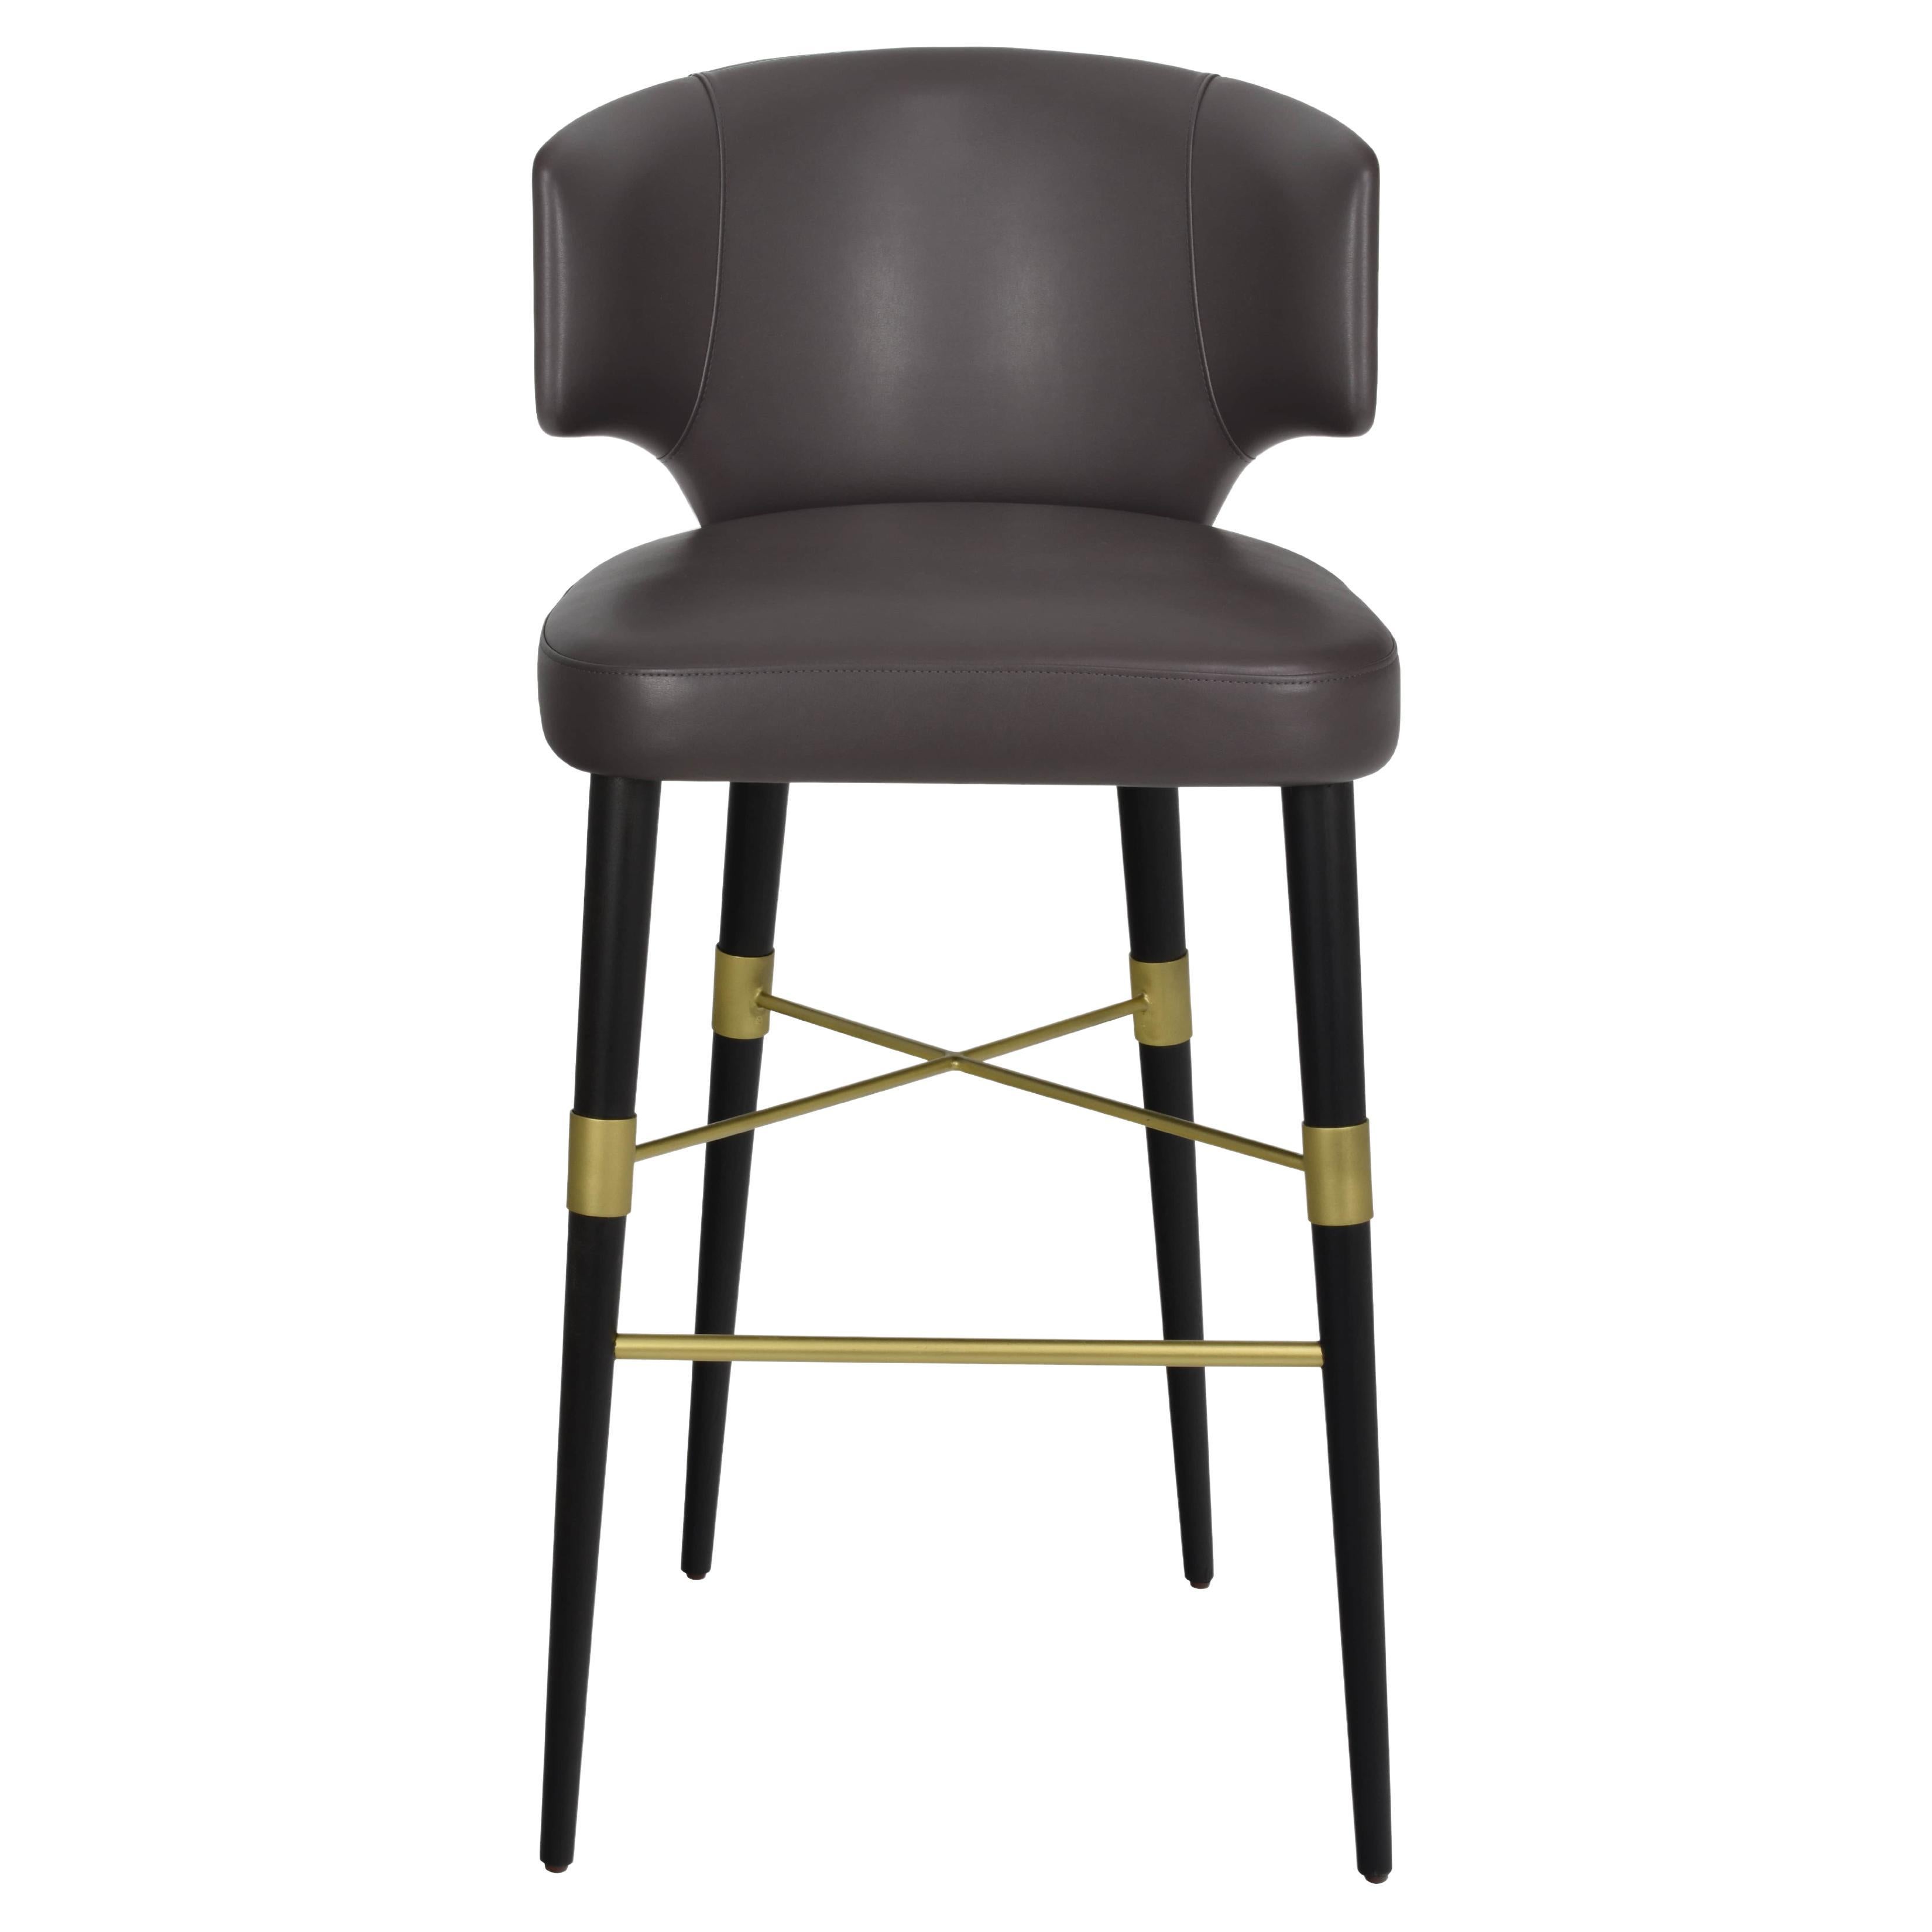 York bar stool with metallic details For Sale